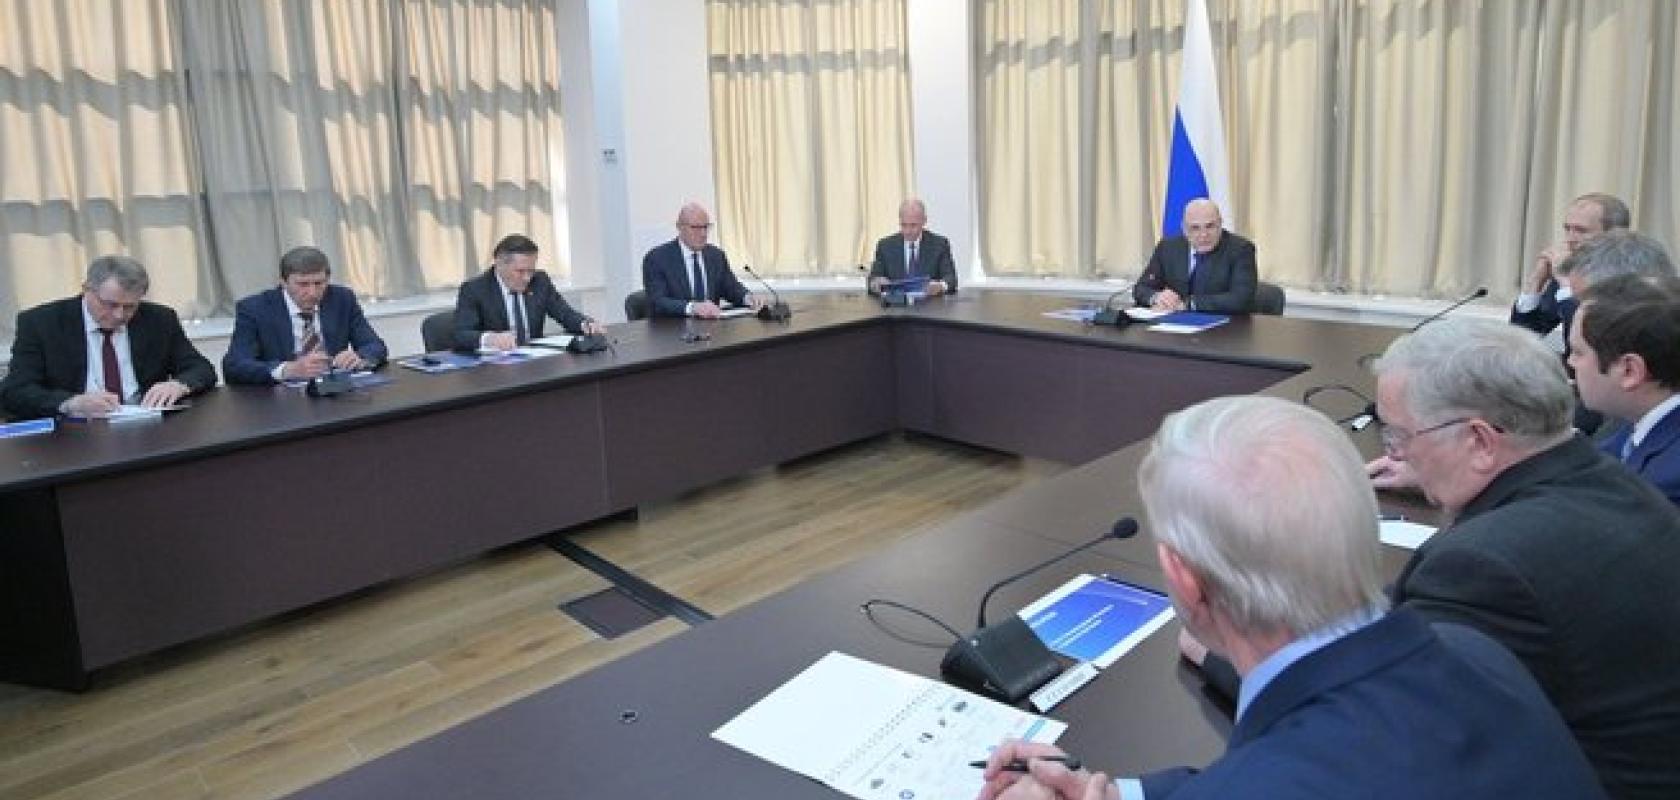 Mikhail Mishustin held a meeting at a technology exhibition to discuss the importance of creating a Russian technological sovereignty in photonics